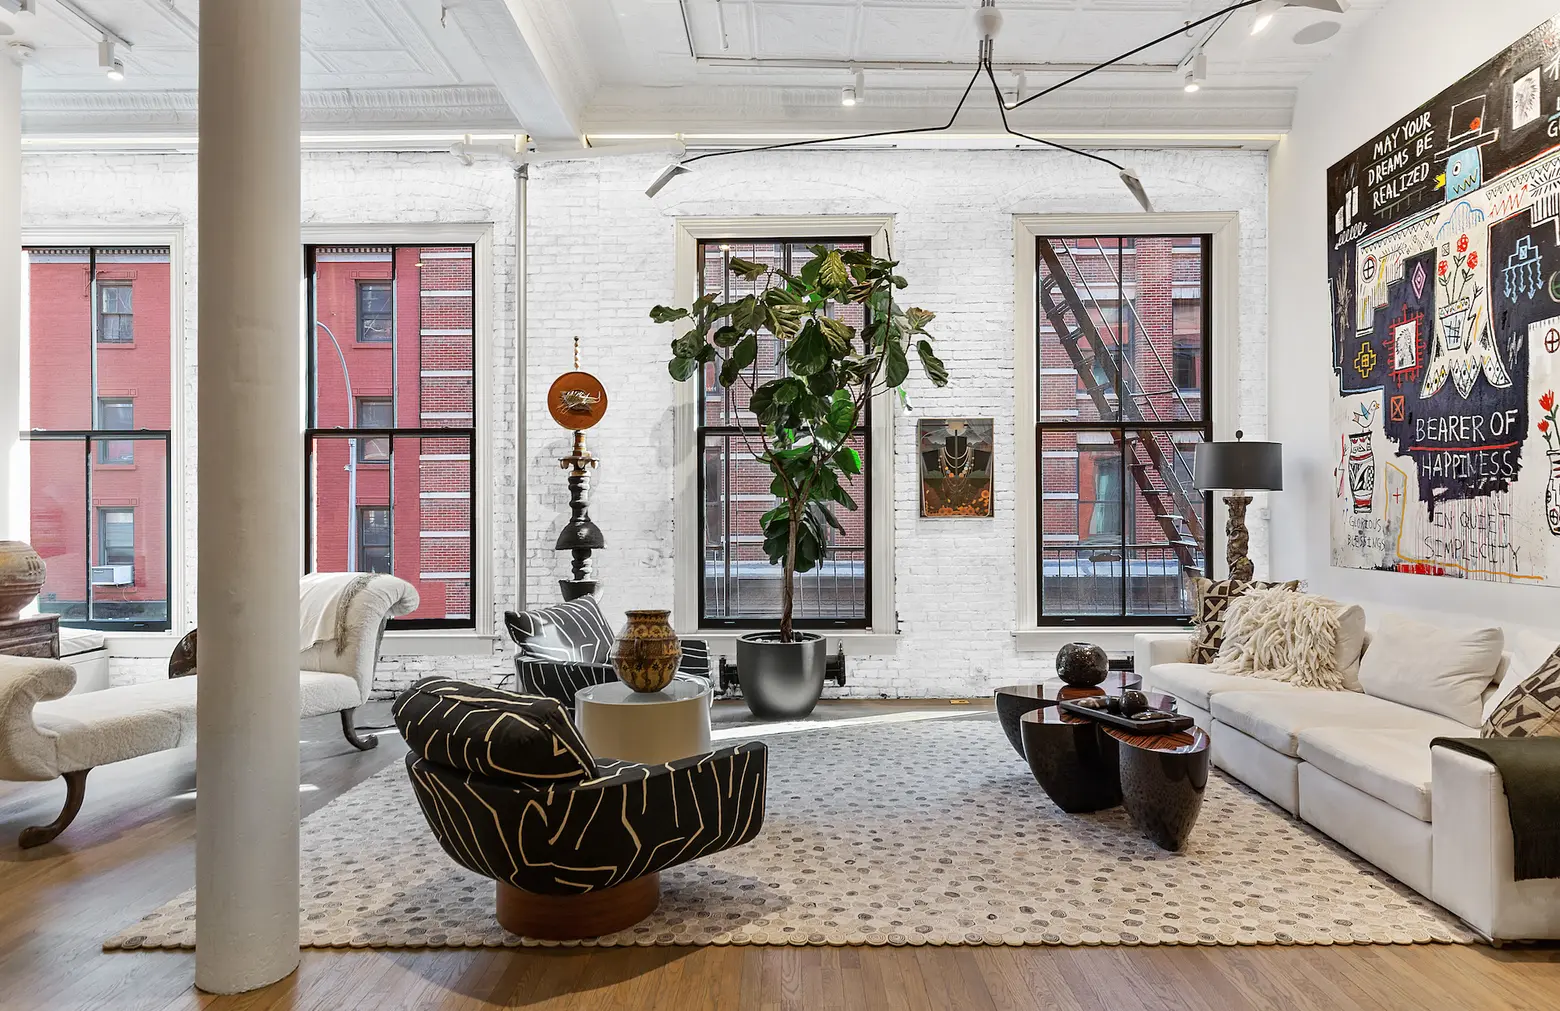 Tale of a Classic SoHo Loft - The New York Times